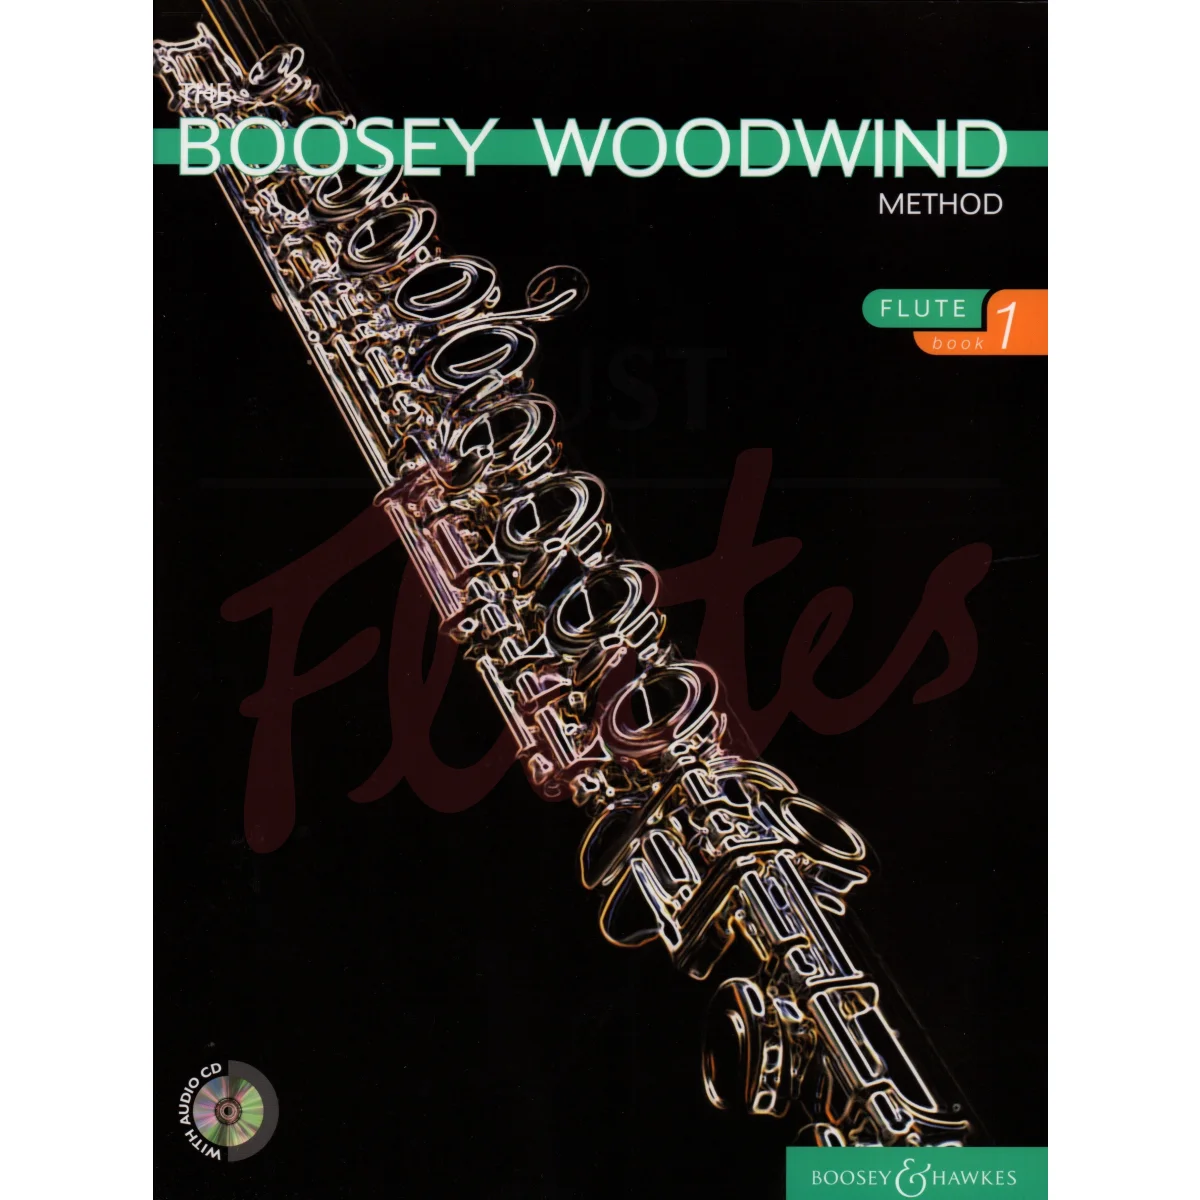 The Boosey Woodwind Method [Flute] Book 1